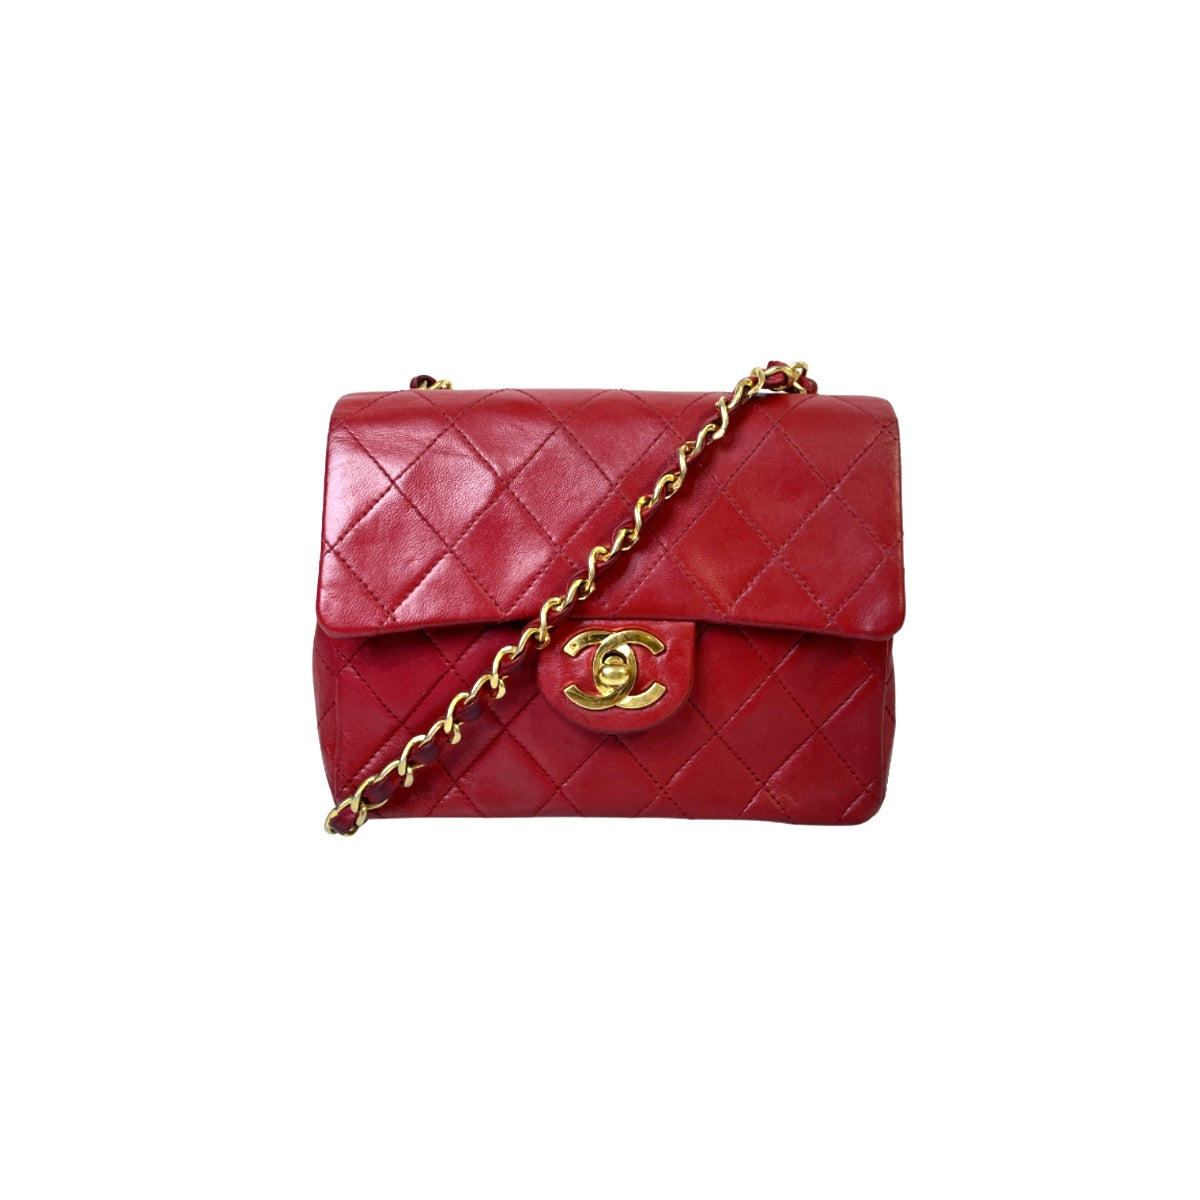 Chanel Bag with Classic Flap Crossbody